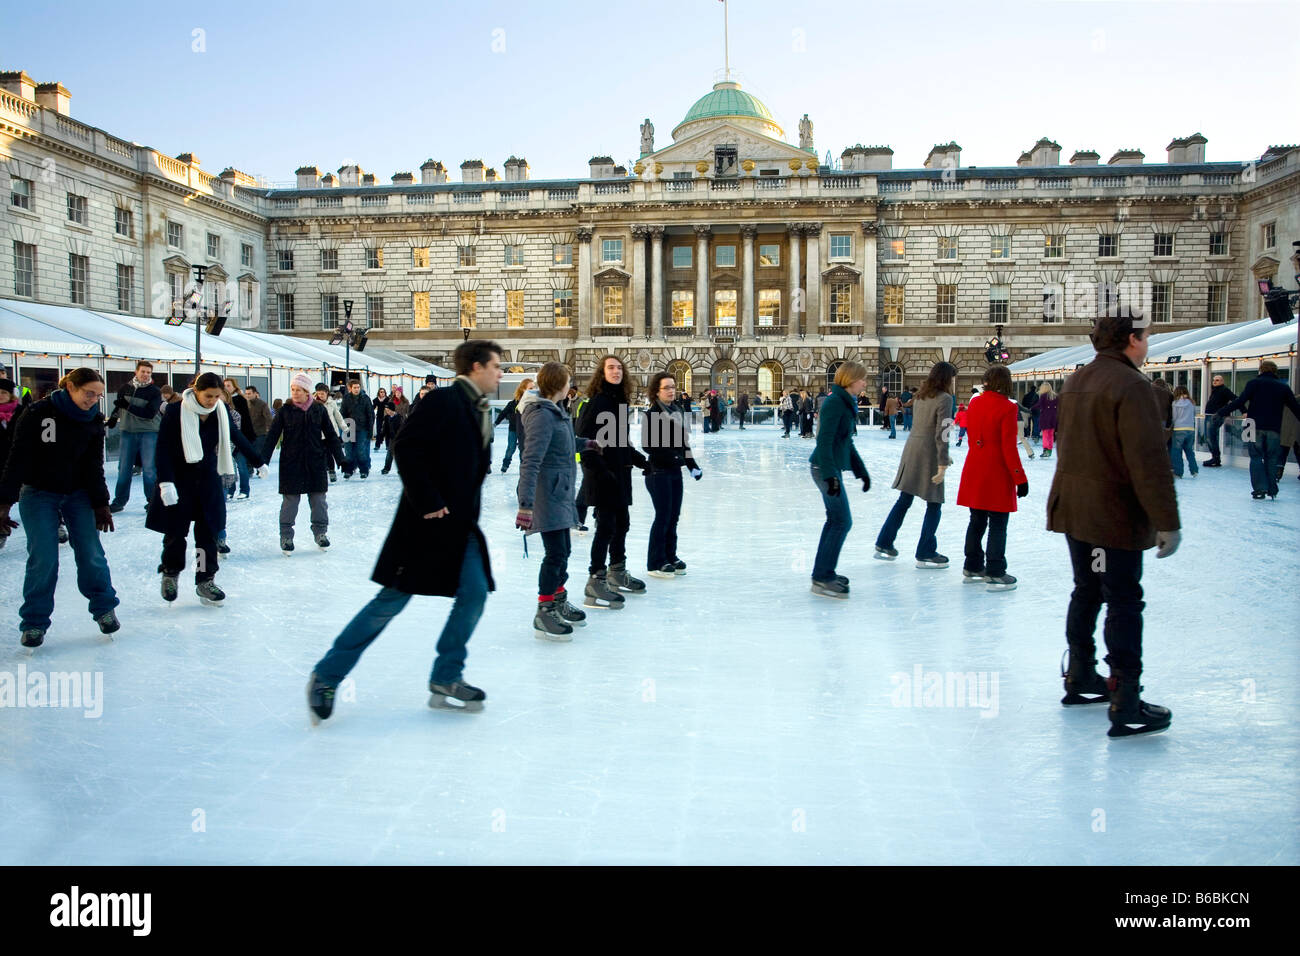 The Christmas skating Rink at Somerset House in London Stock Photo